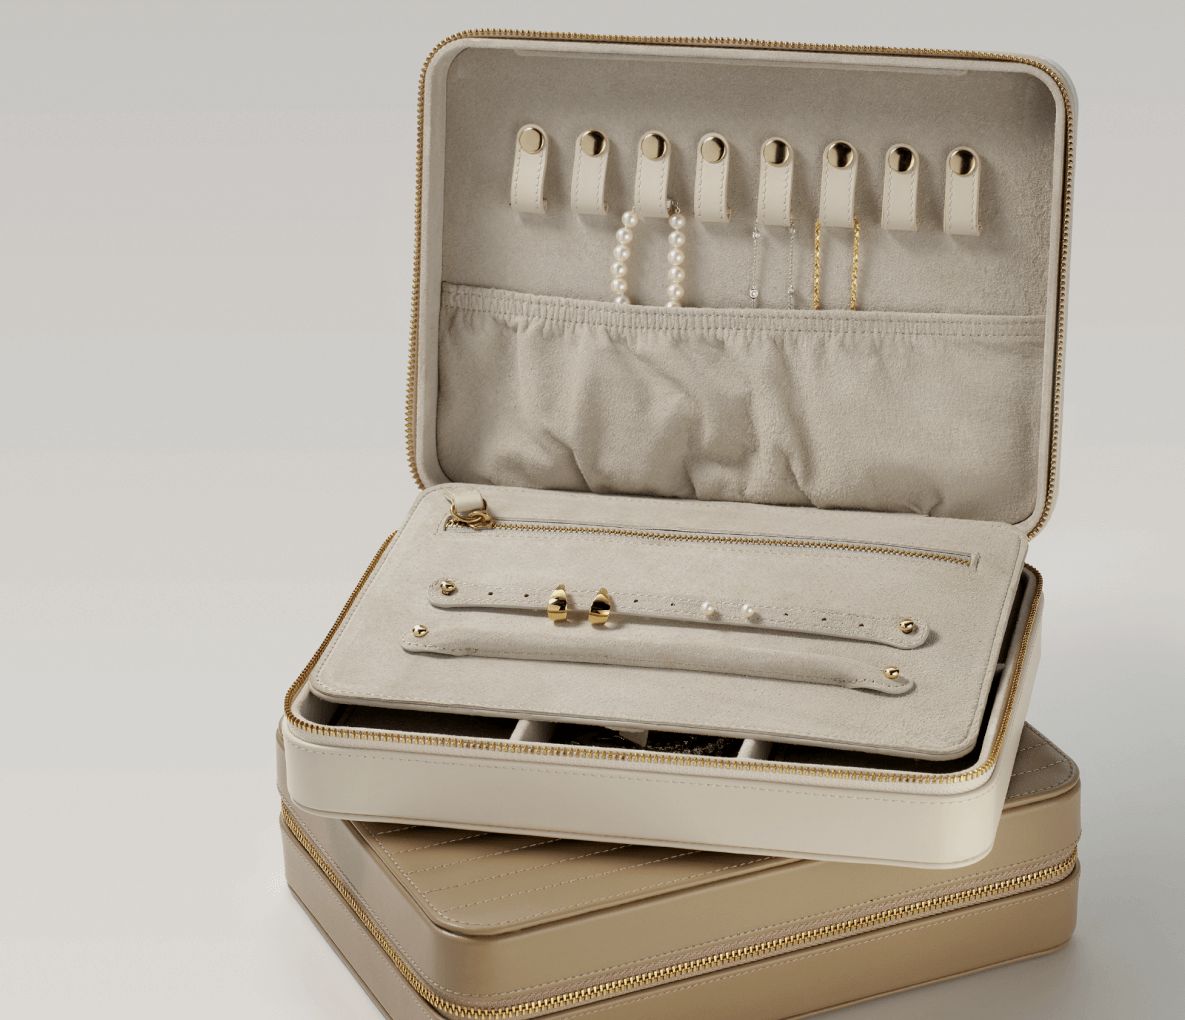 A jewelry case showing off the necklace holder